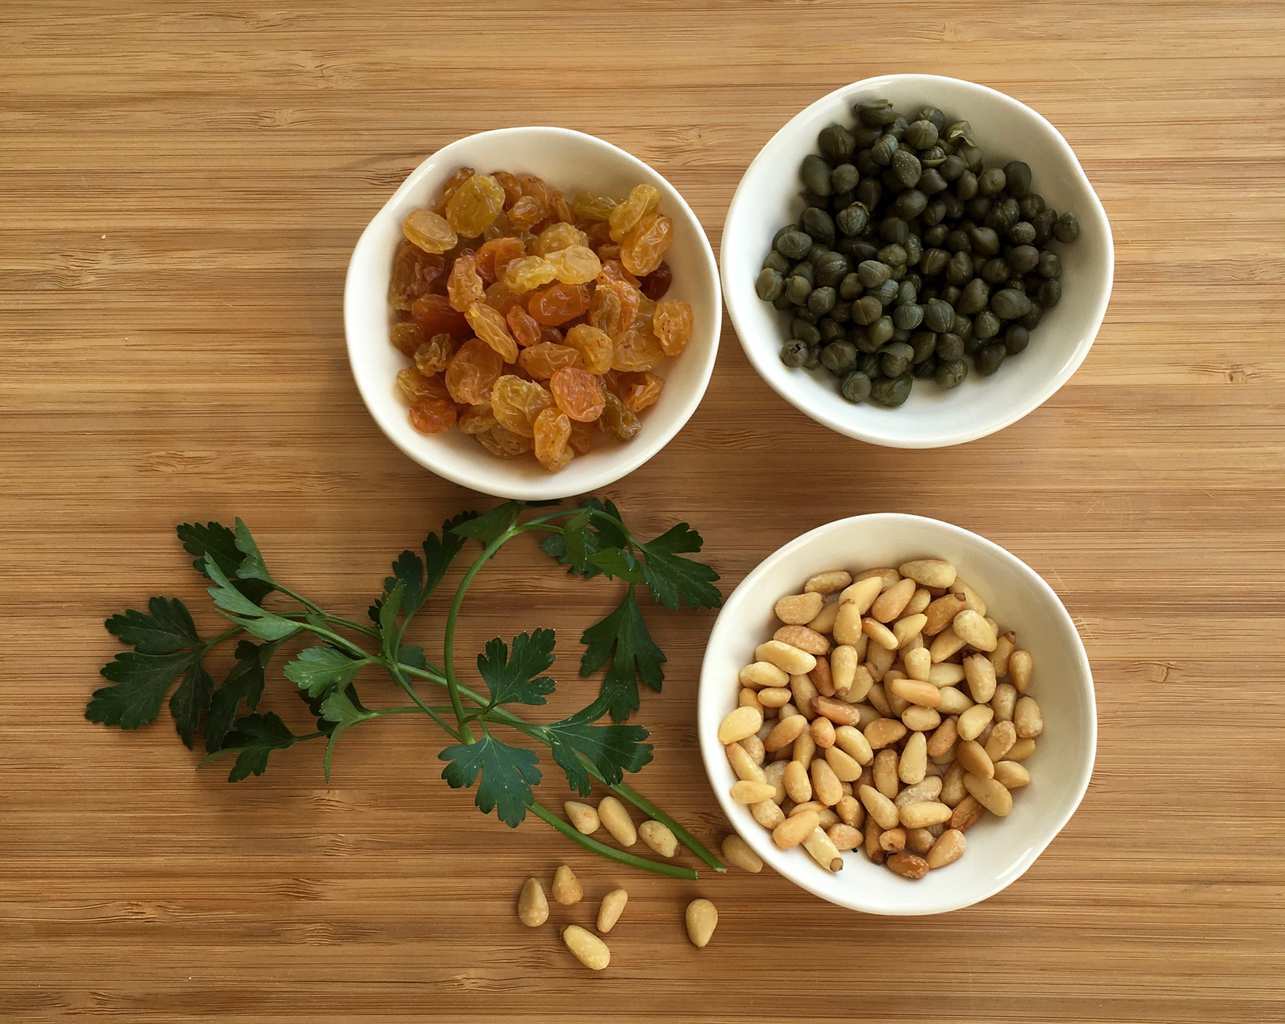 Overhead view of three small dishes: one of golden raisins, one of pine nuts, one of capers. 